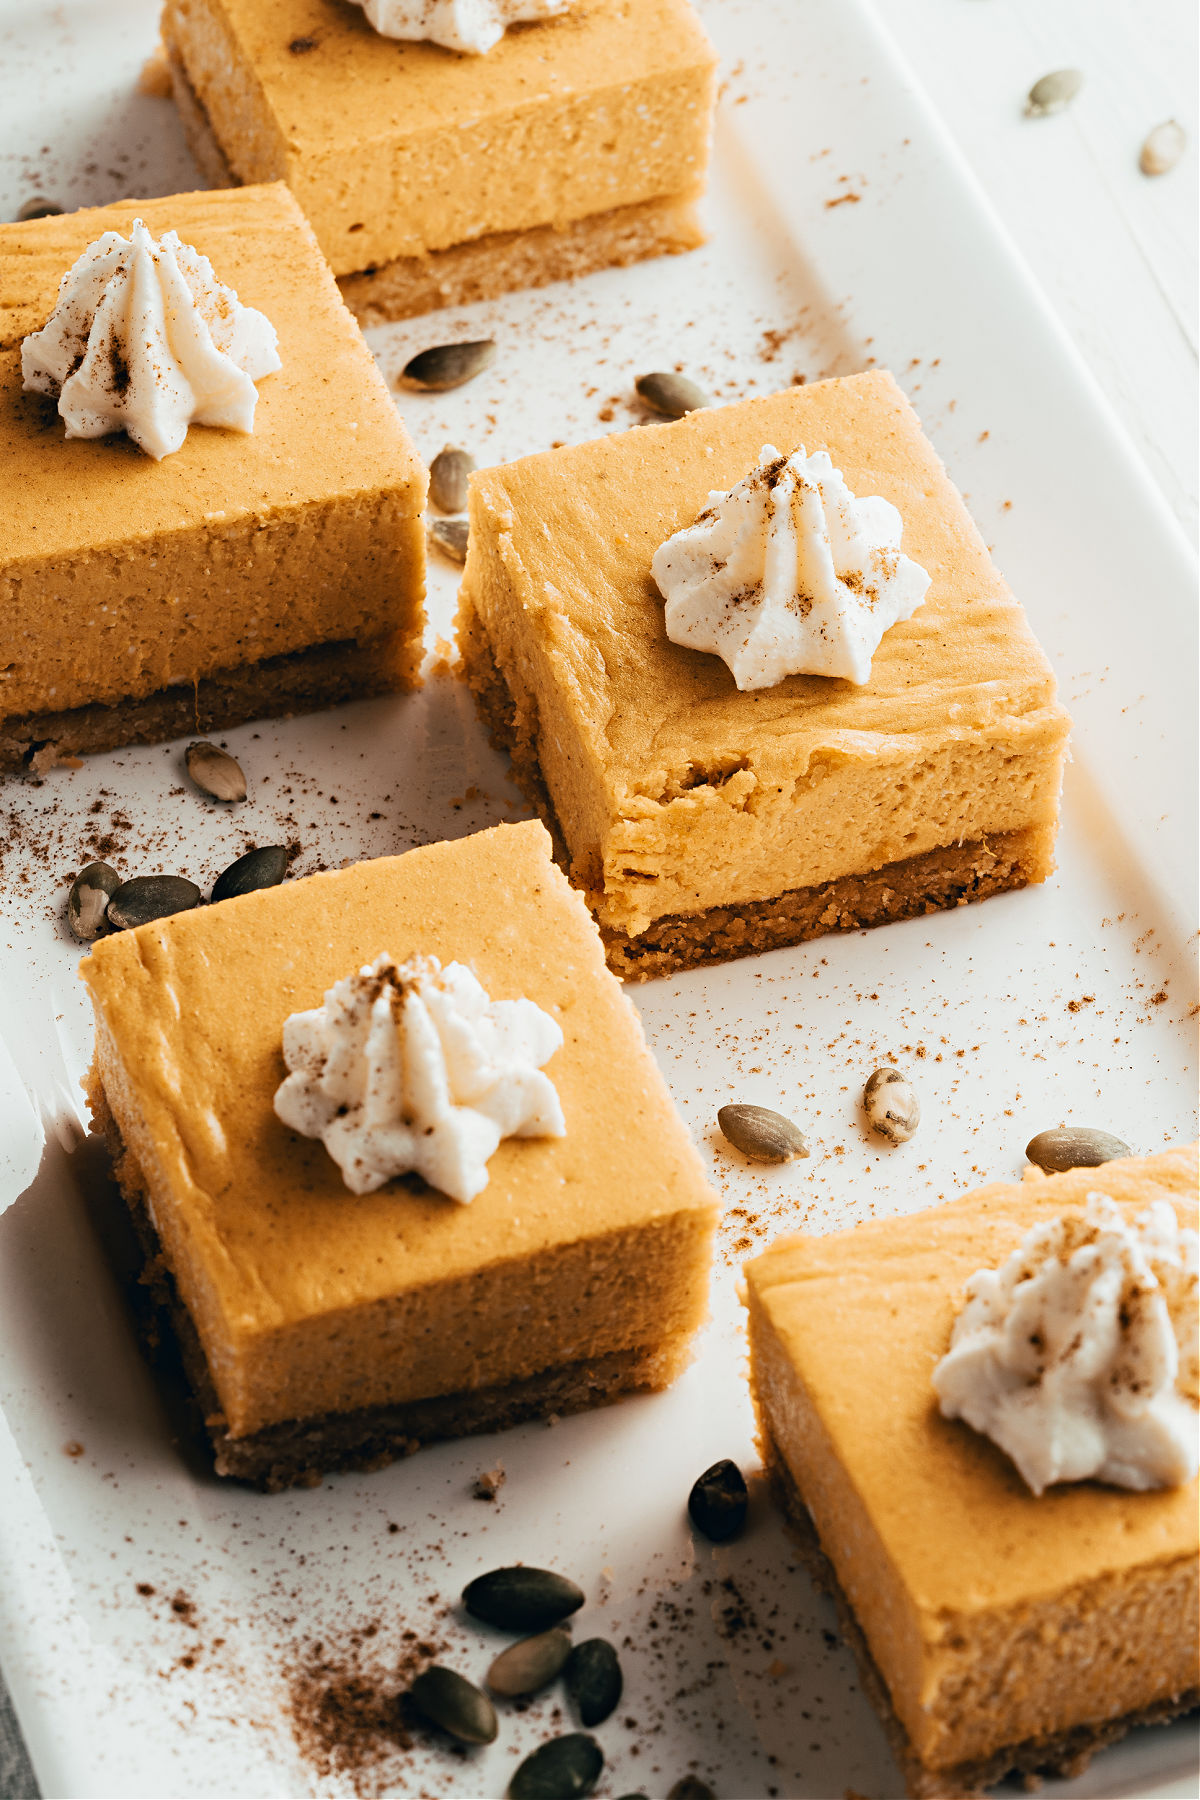 Squares of pumpkin cheesecake on serving plate.